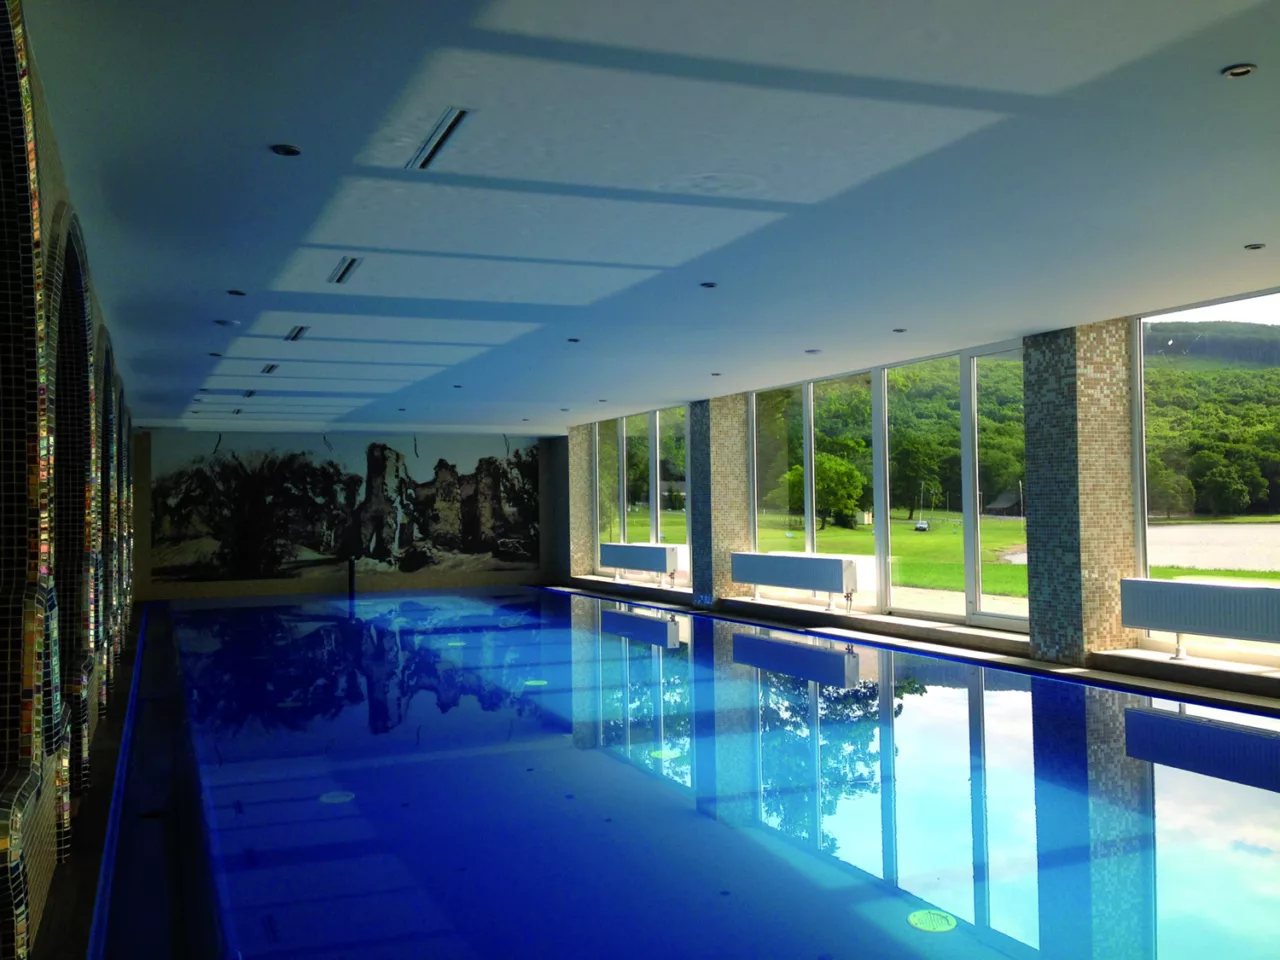 Dehumidification of pools | Blog - Microwell